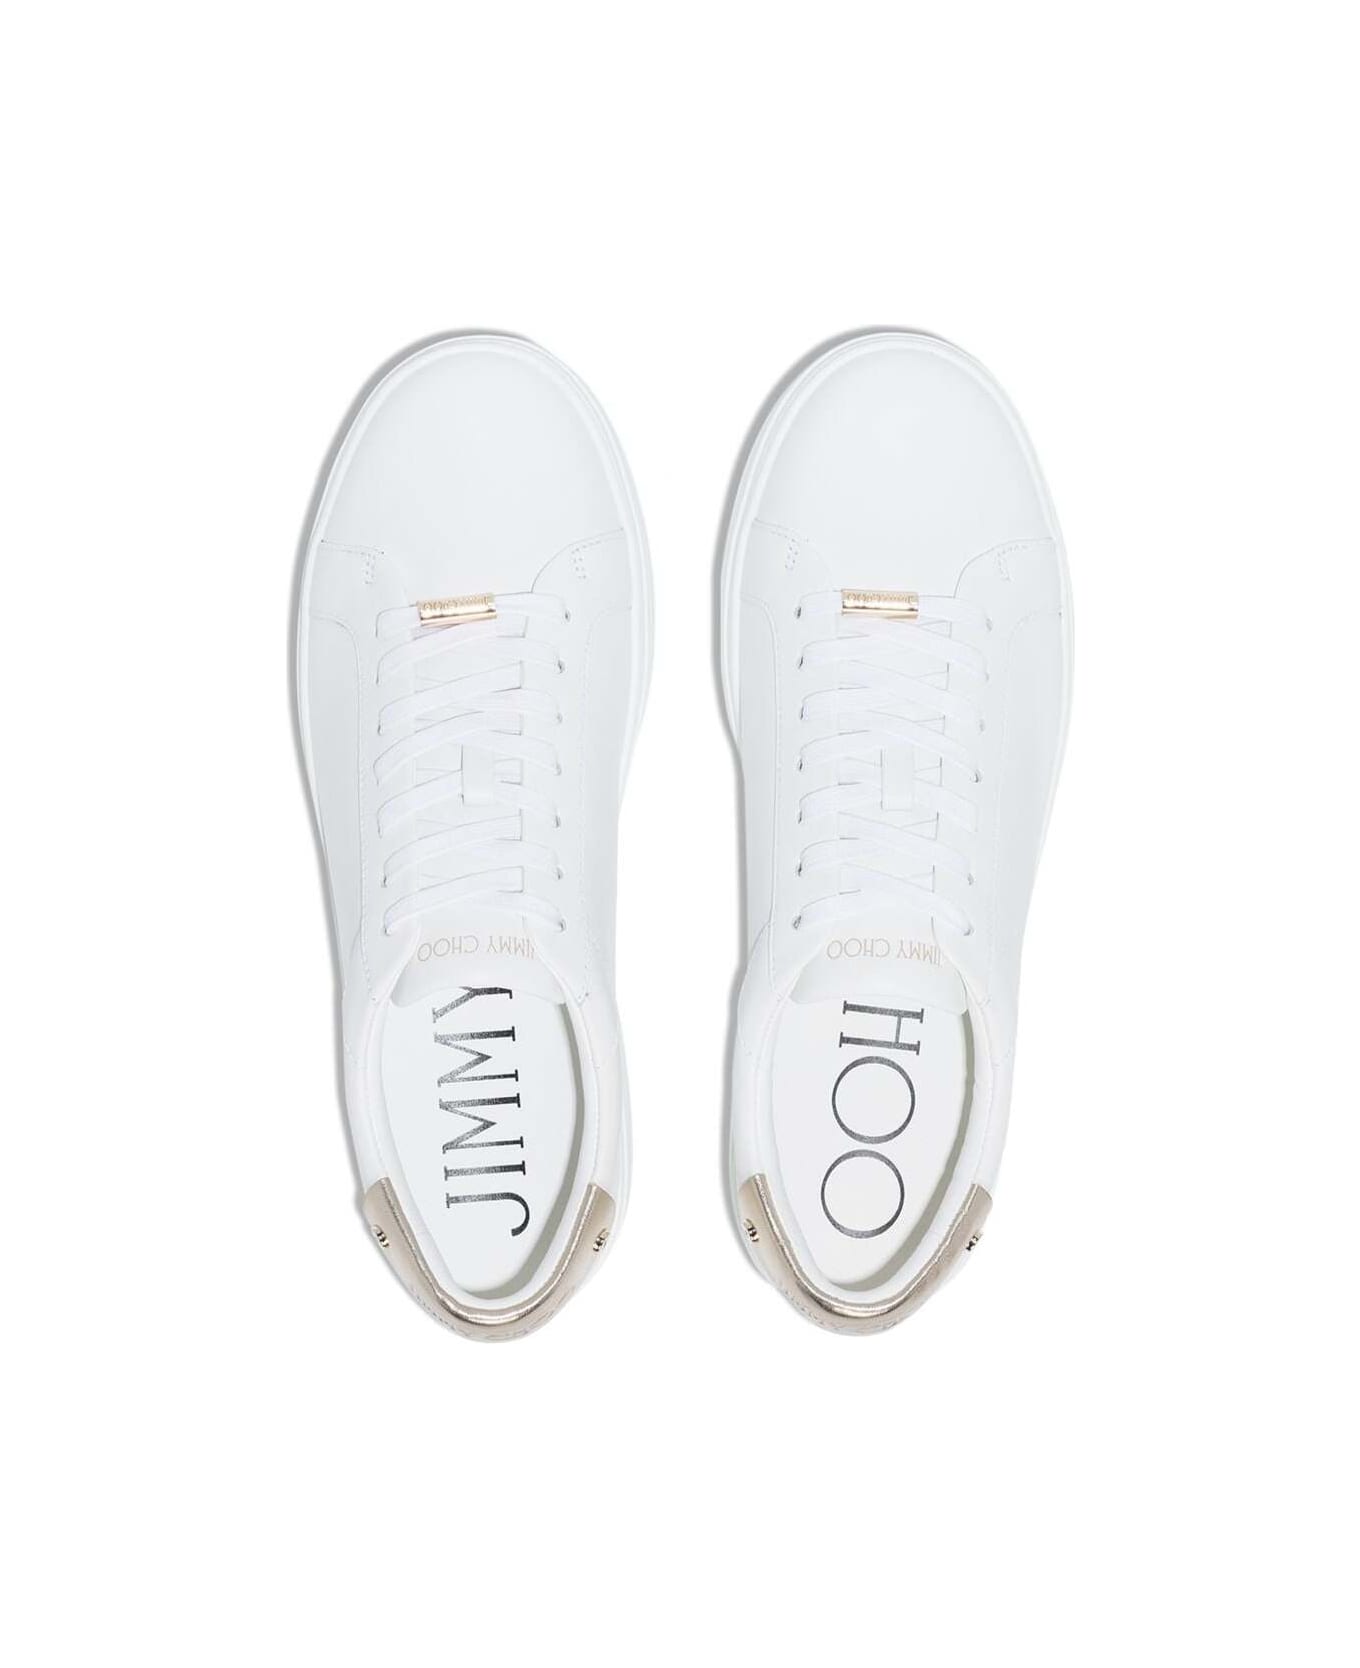 Jimmy Choo Woman's Rome White Leather Sneakers - White スニーカー